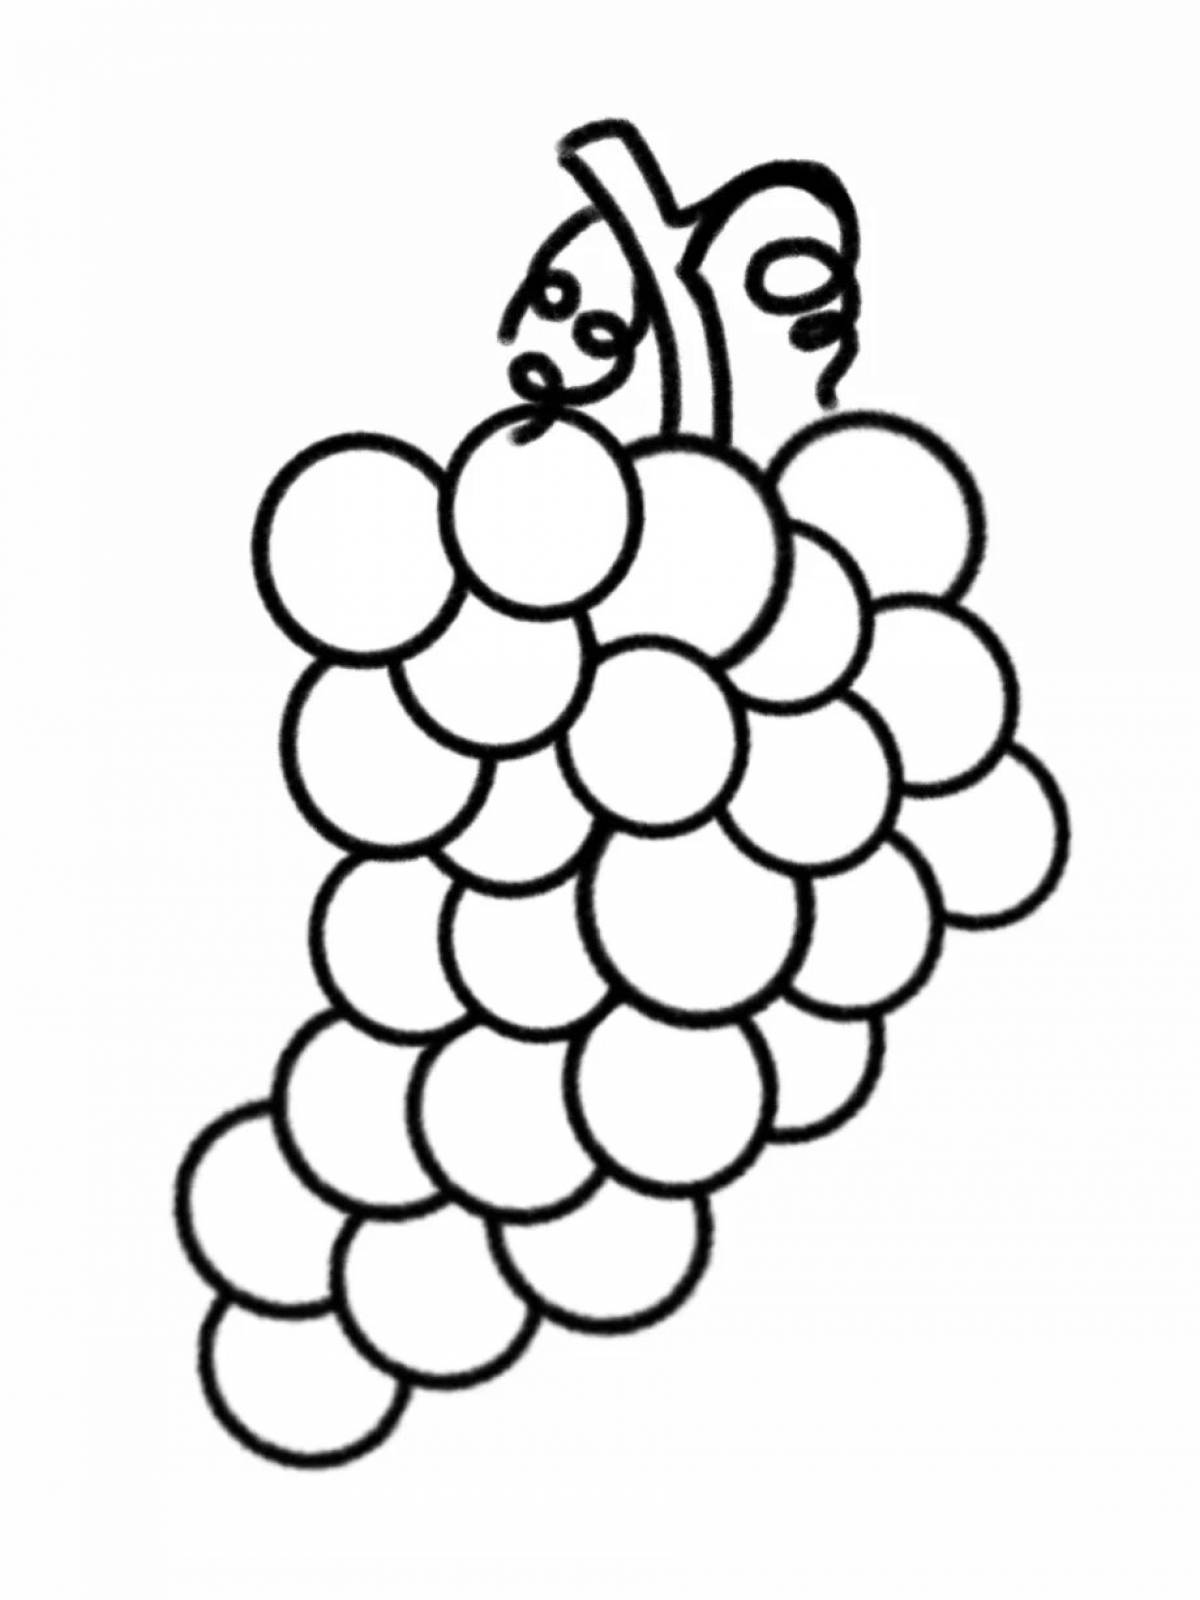 Sweet Grape Coloring Page for Toddlers